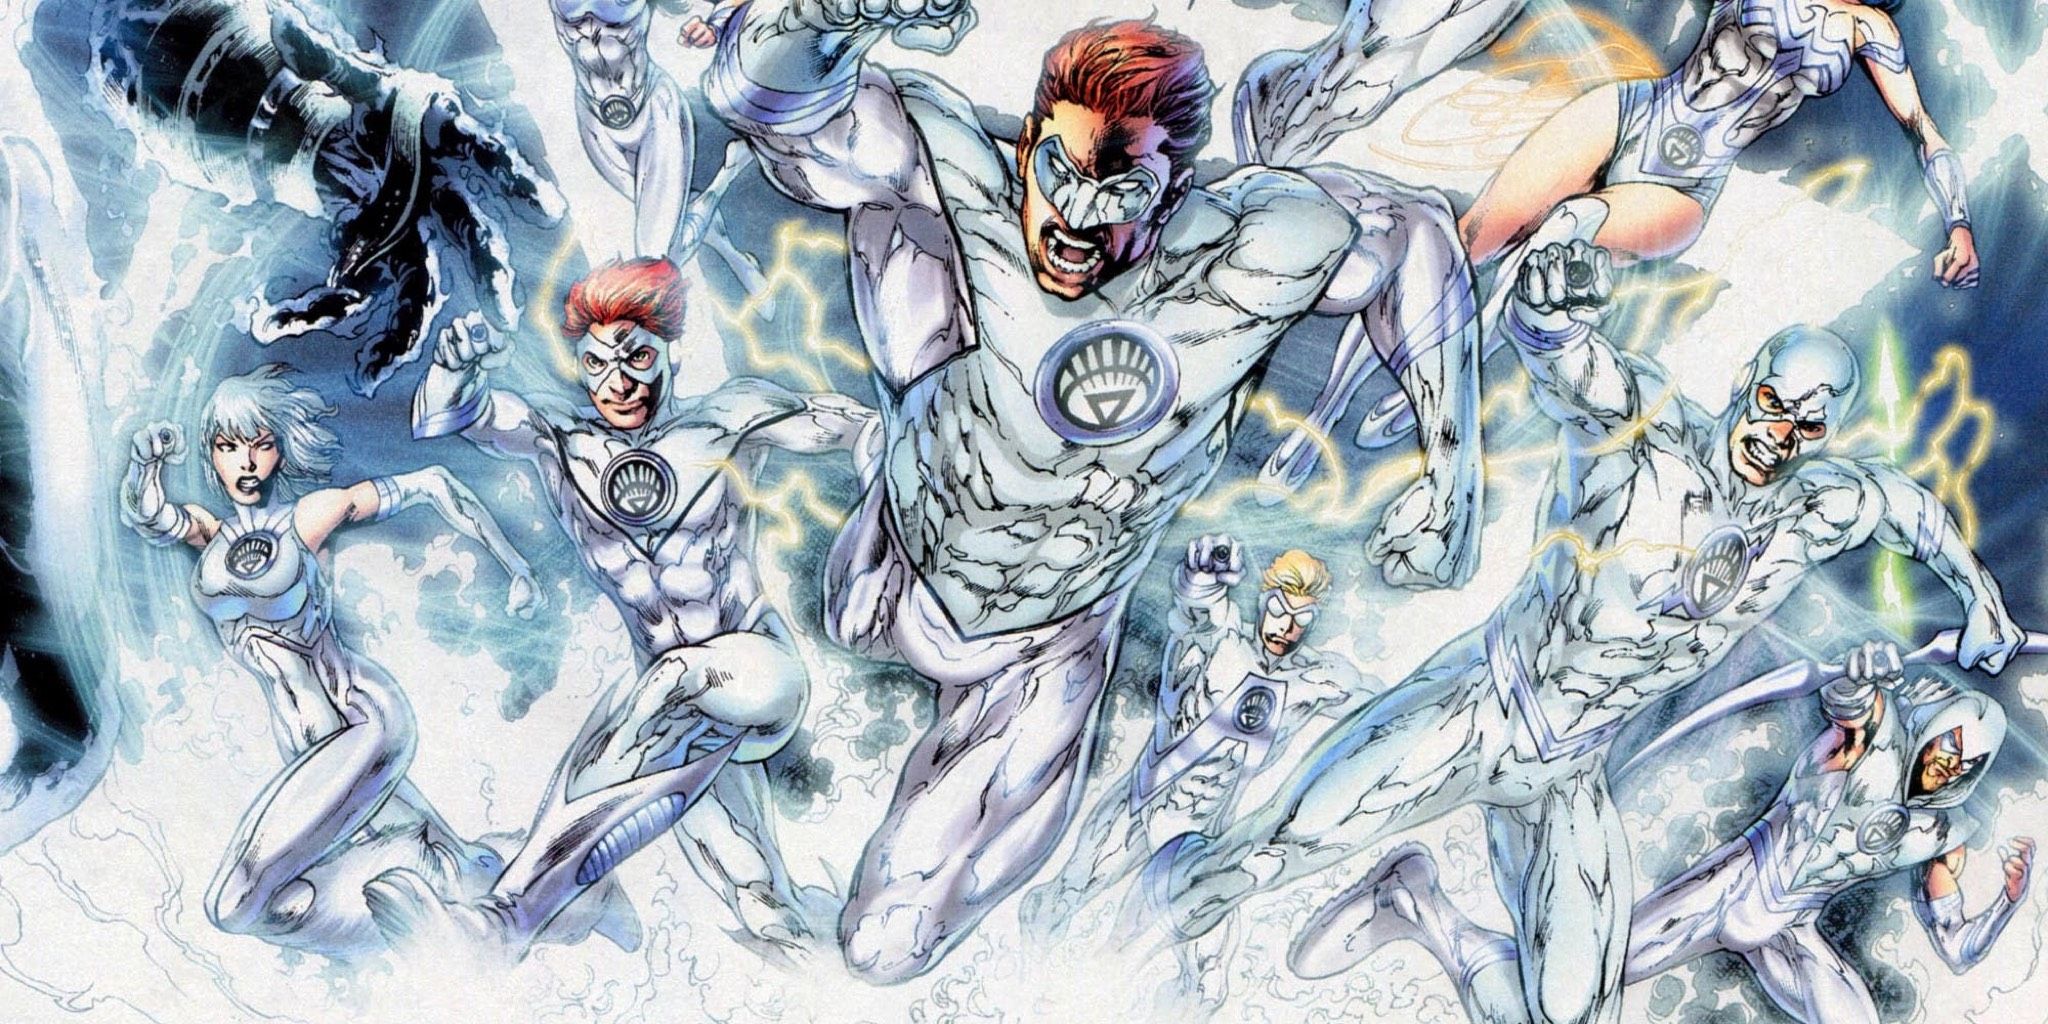 An image of Hal Jordan leading the White Lantern Corps into battle